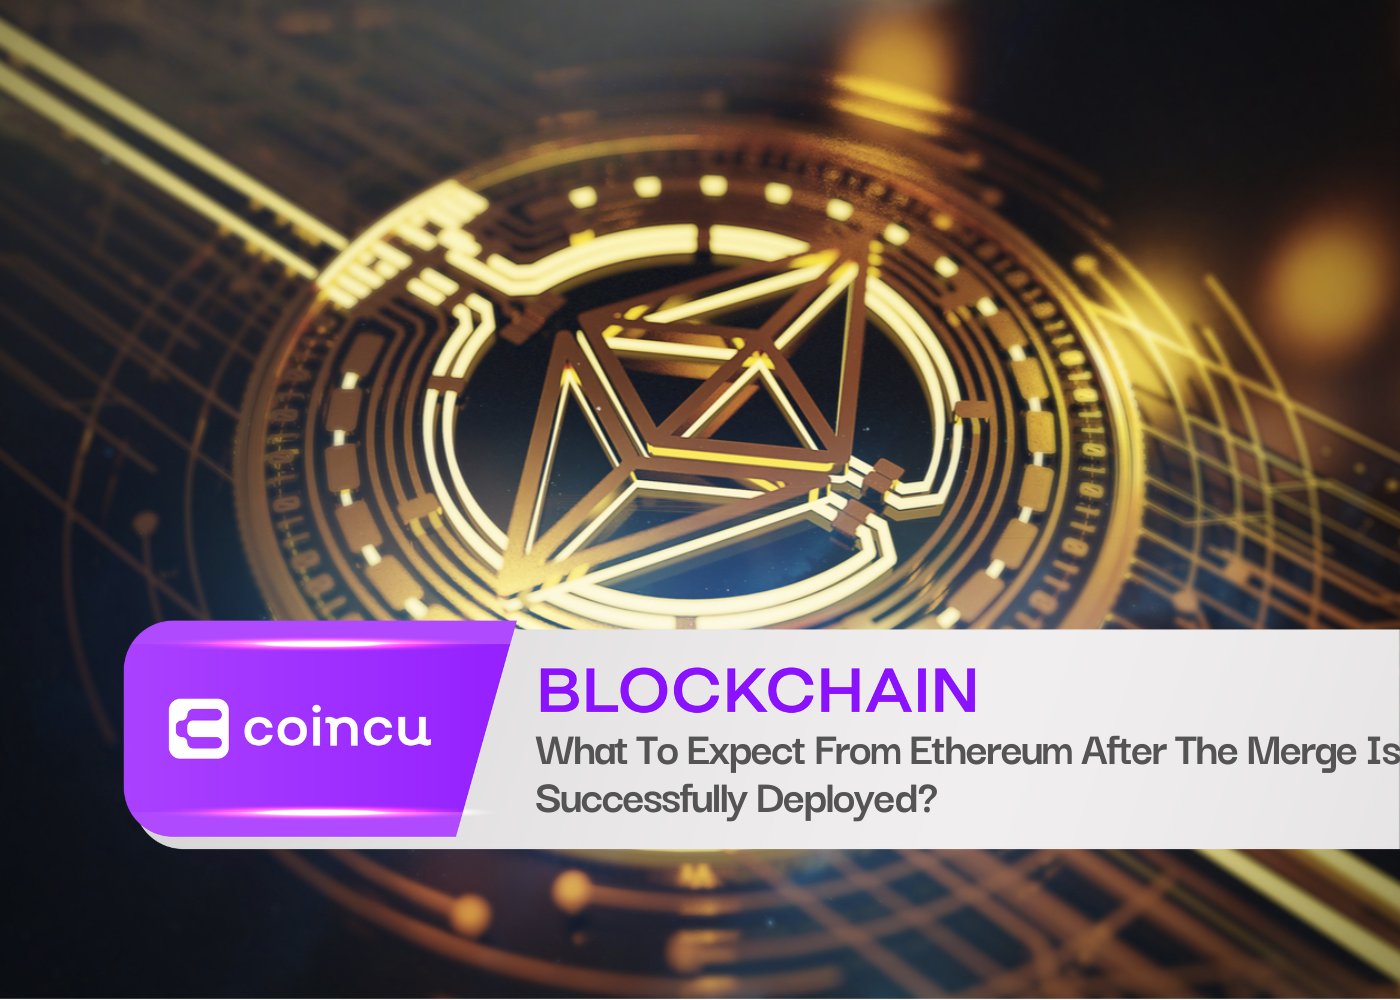 What To Expect From Ethereum After The Merge Is Successfully Deployed?